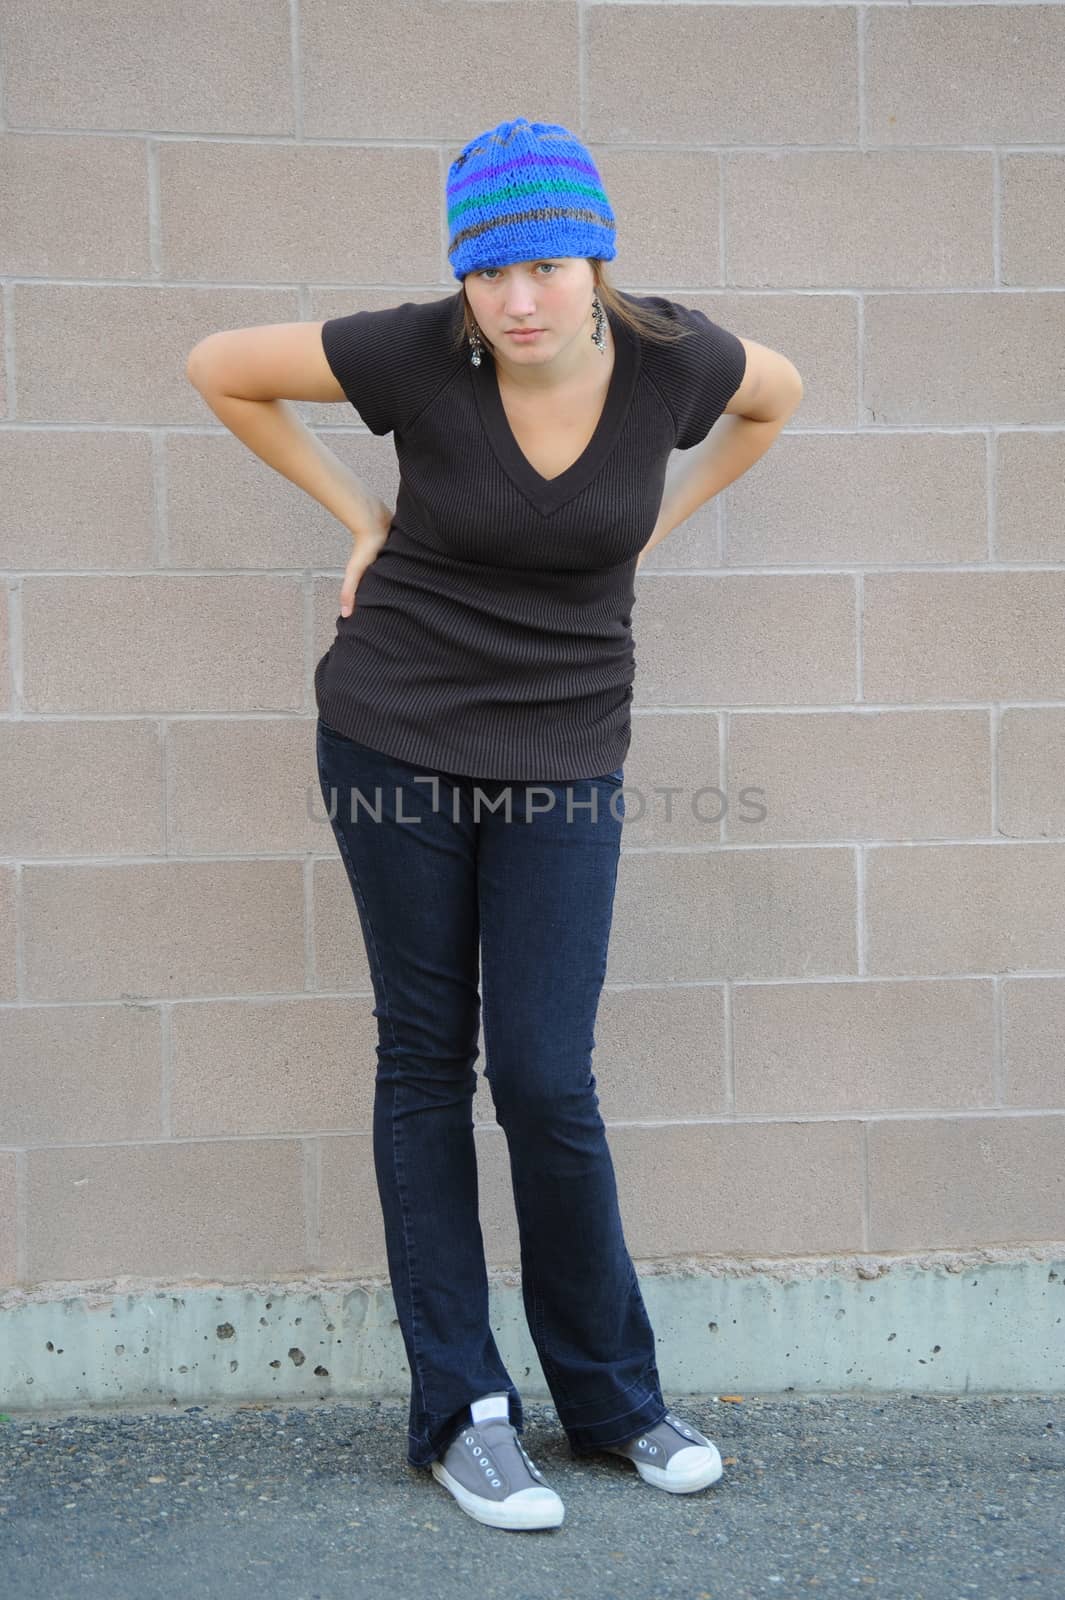 Female tomboy posing against a wall outside.